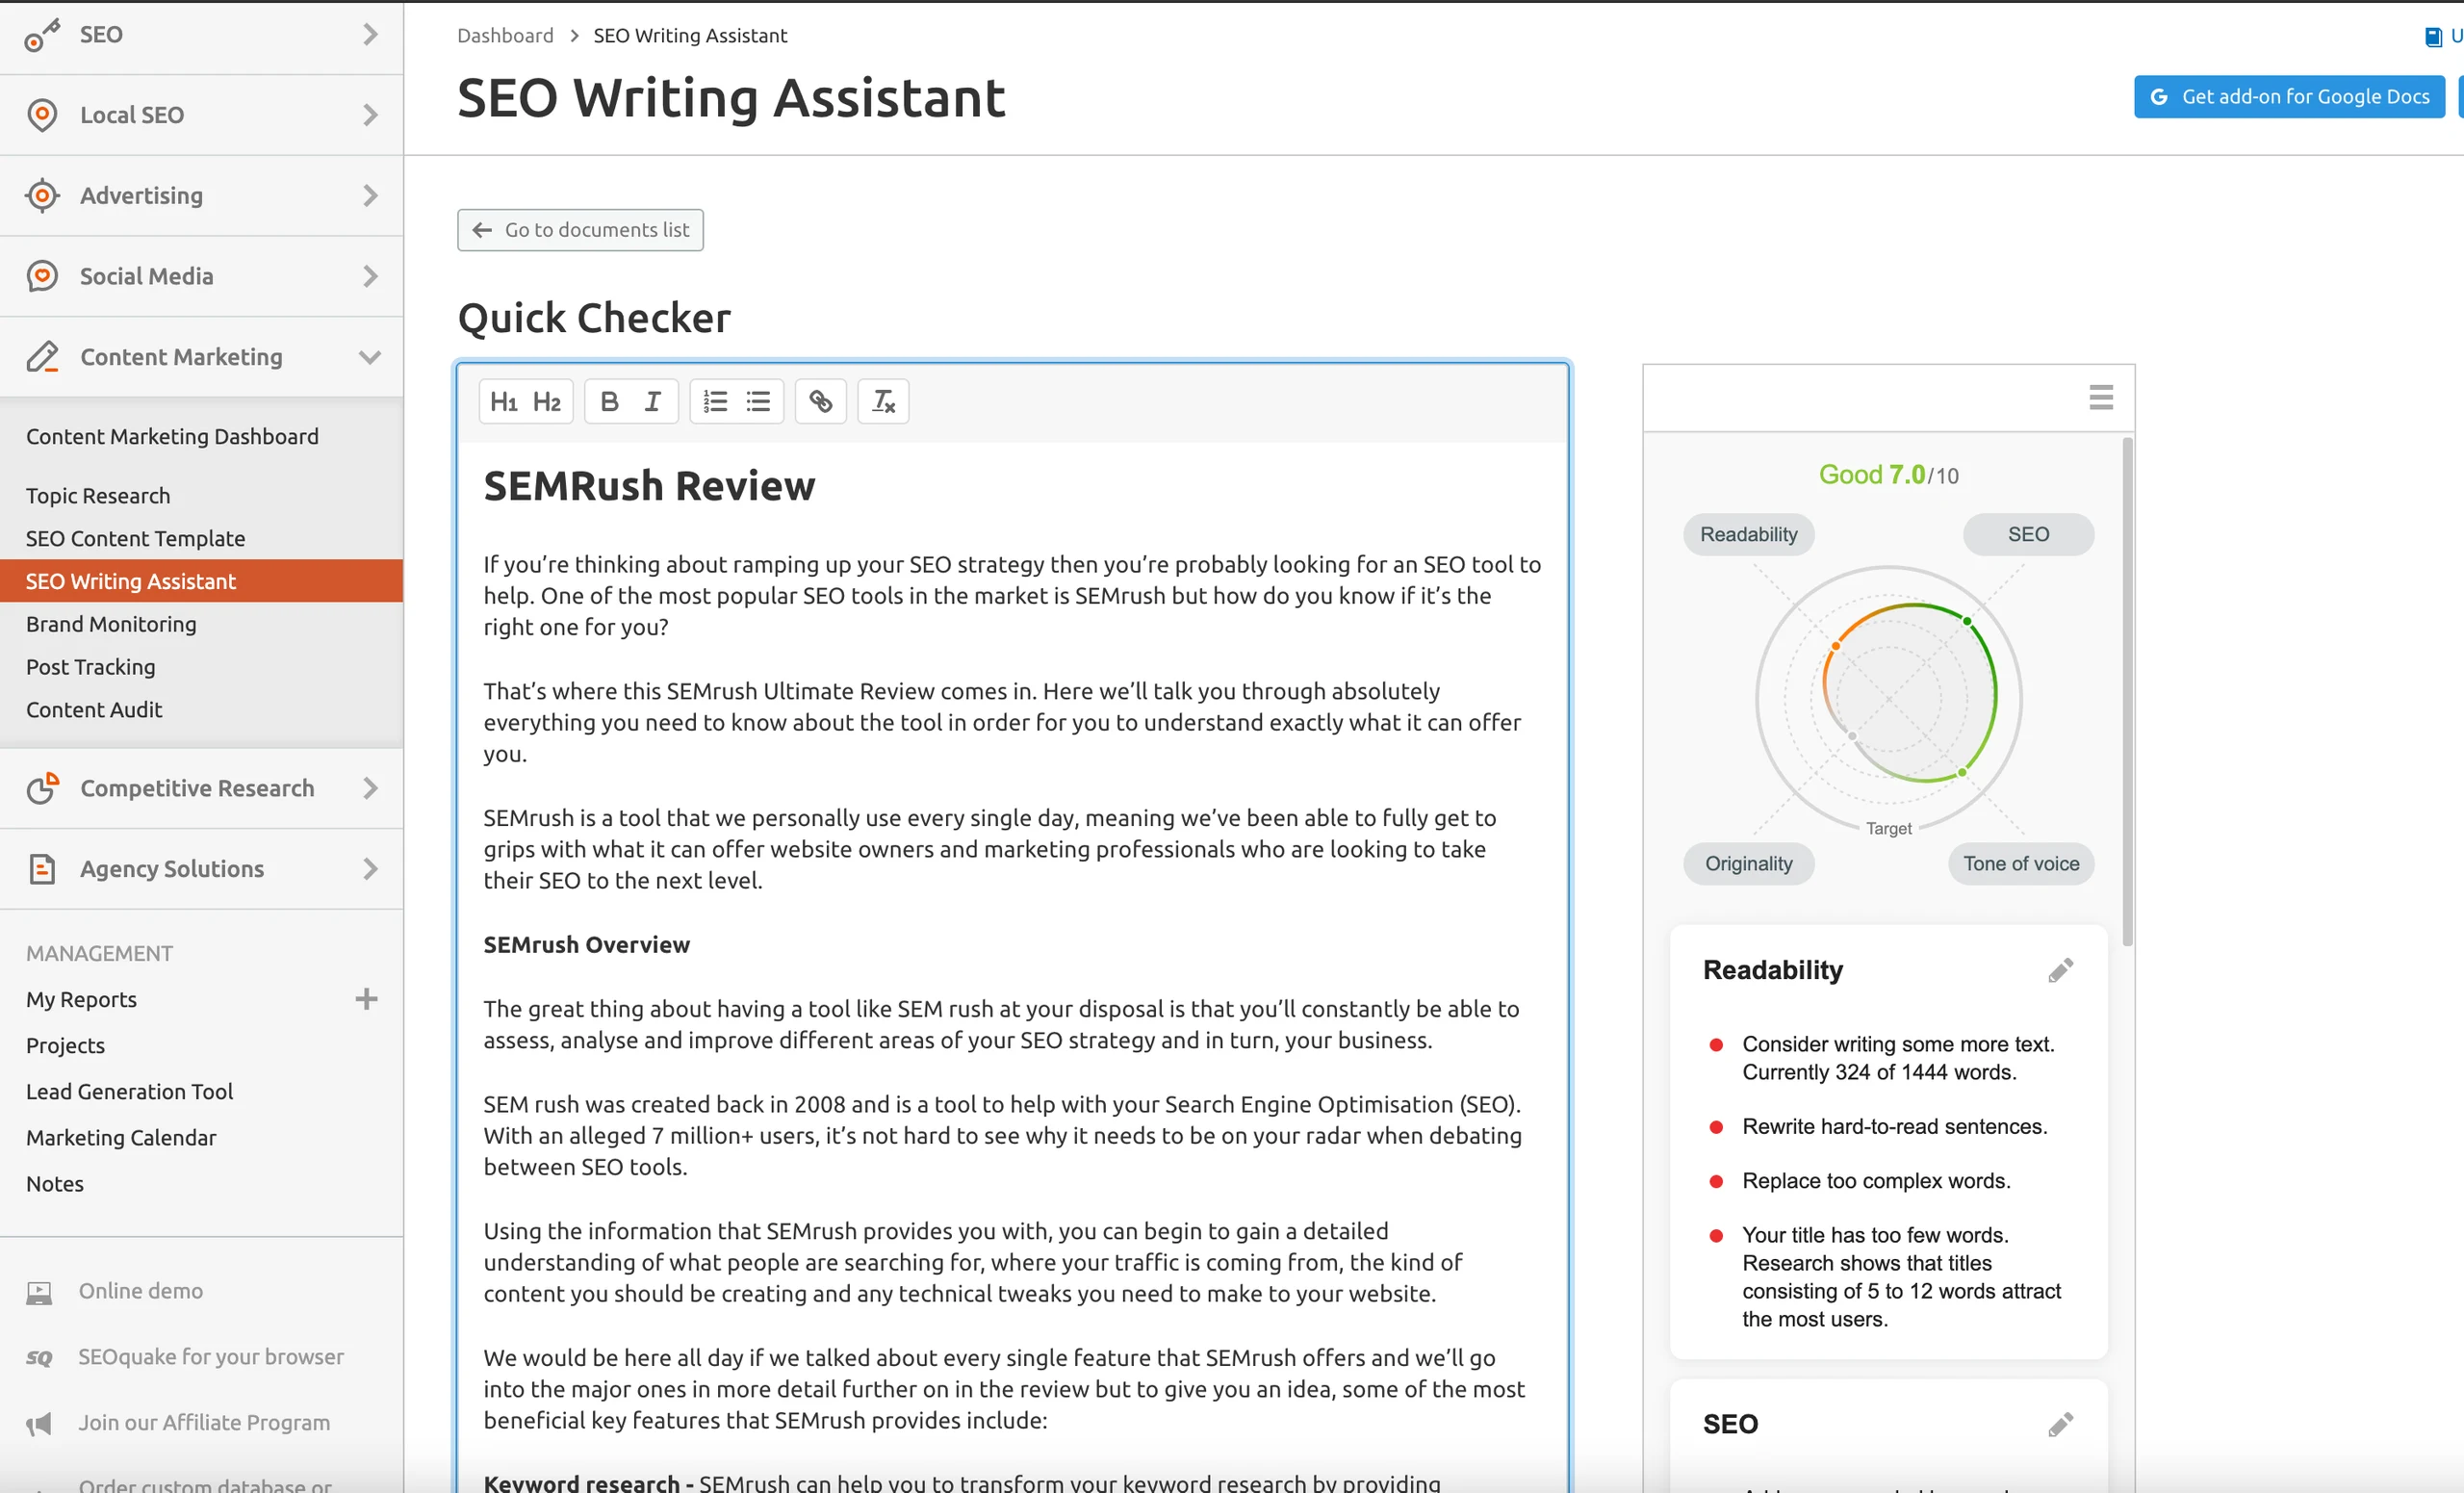 SEMRush writing assistant in action